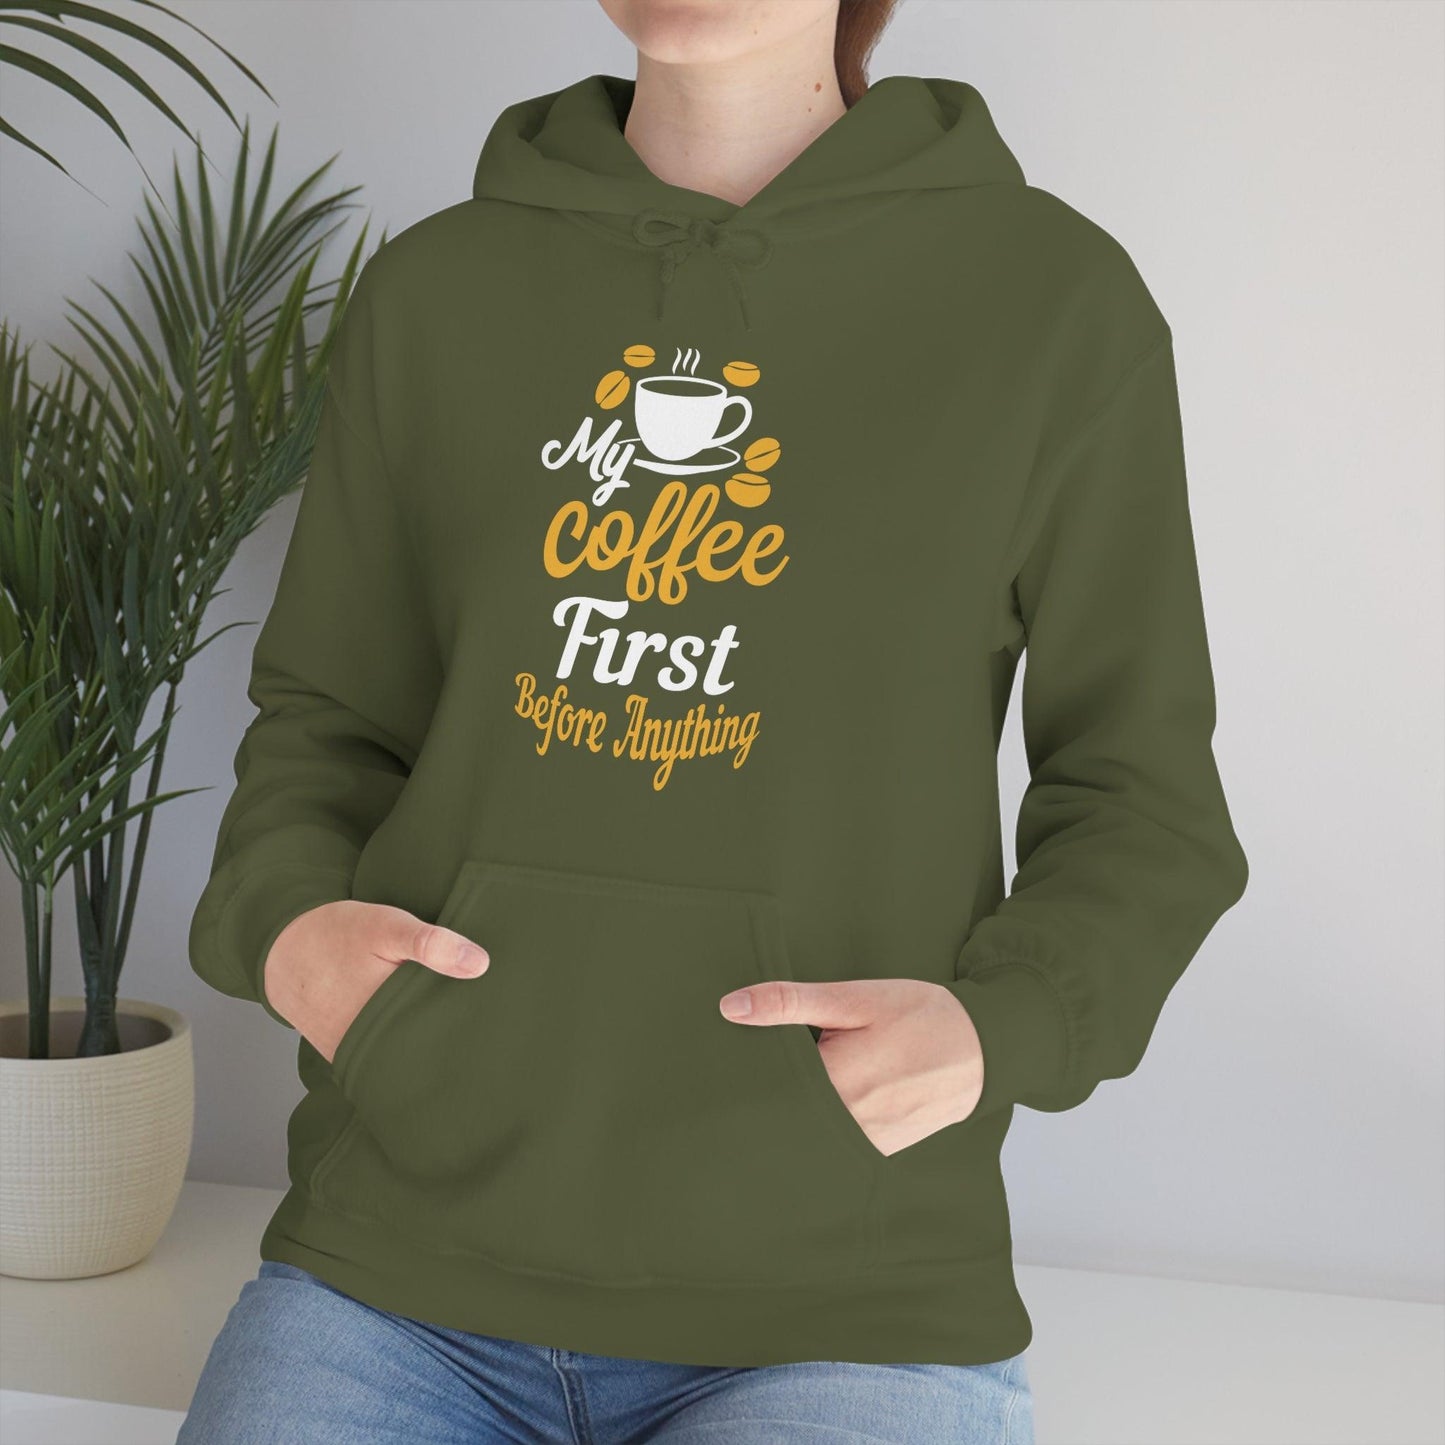 My coffee first before anything Hoodie